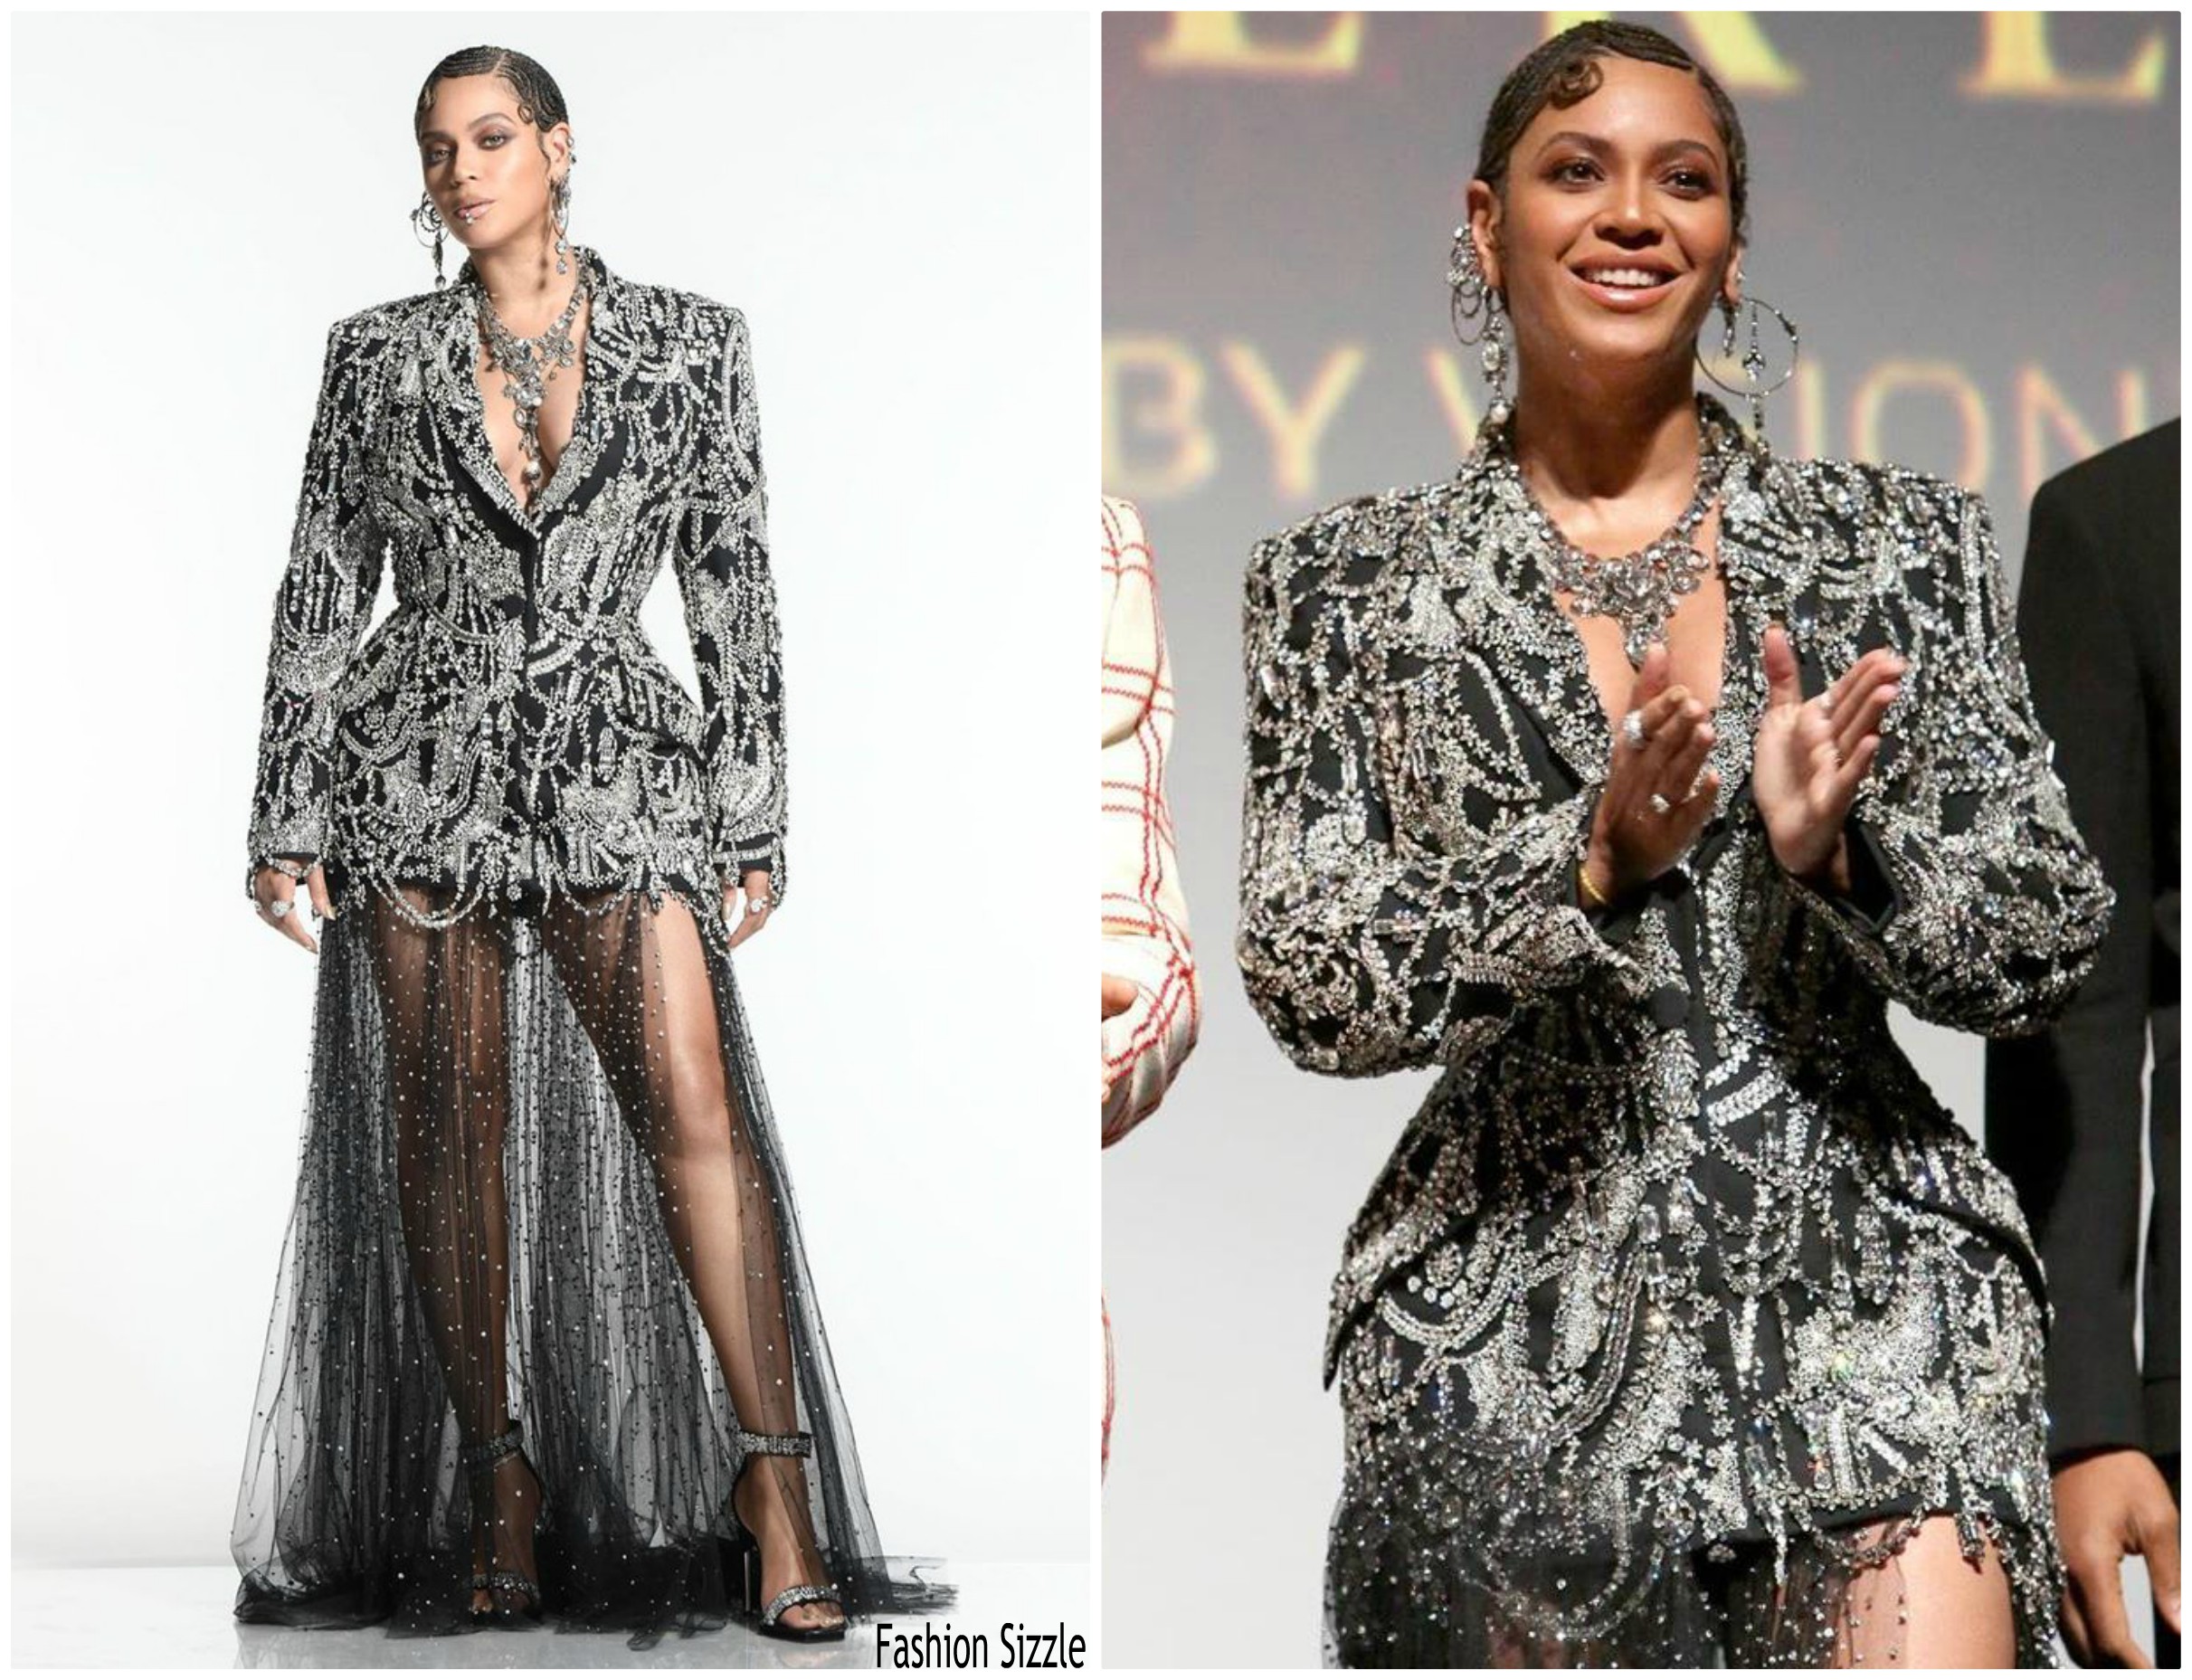 beyonce-knowles-in-alexander-mcqueen-the-lion-king-world-premiere